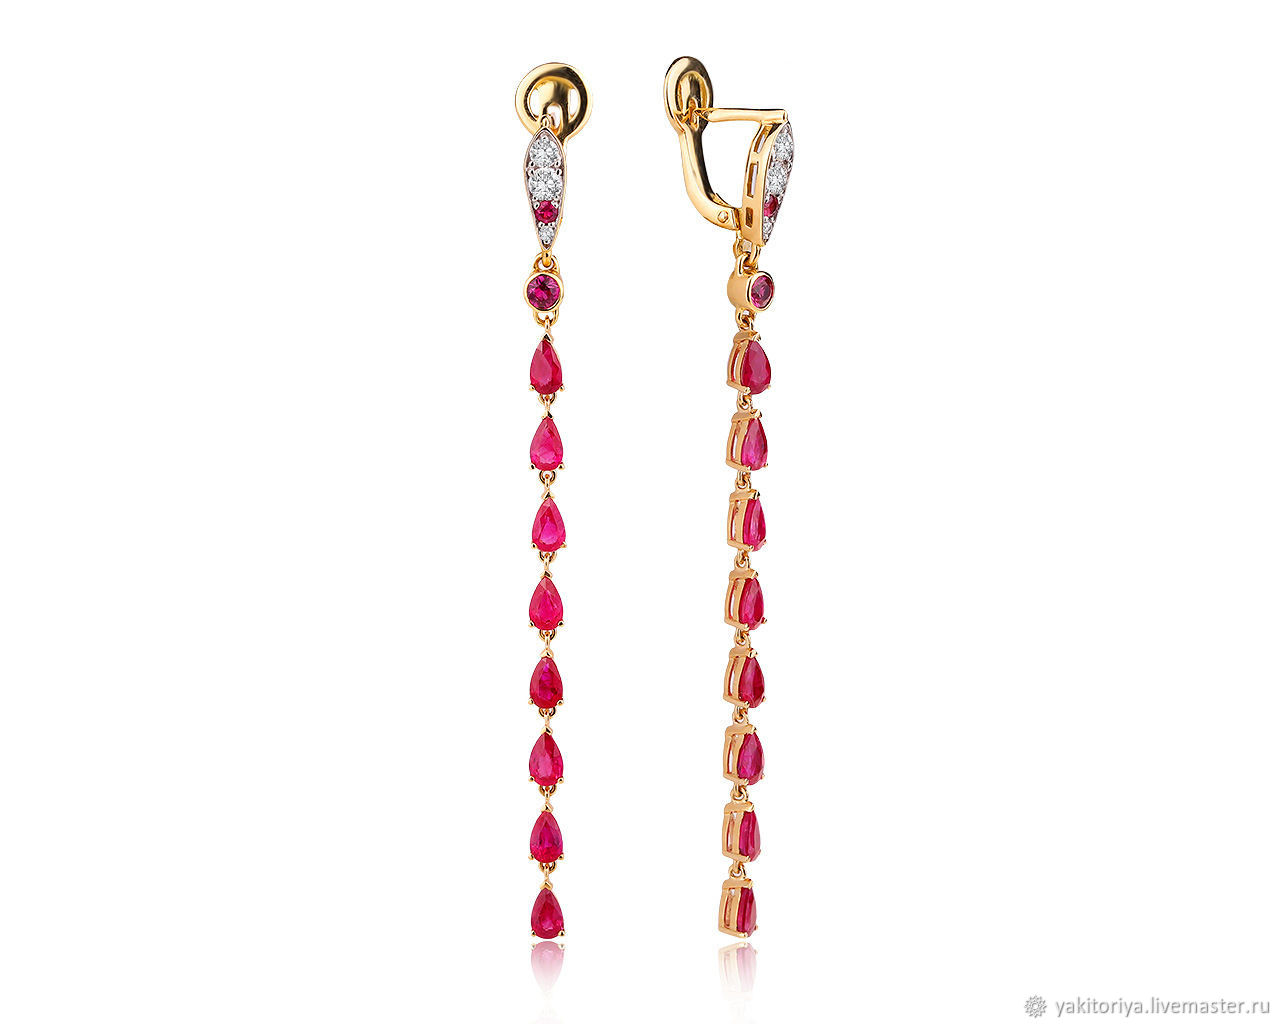 Gold earrings with rubies 3,5 ct, Earrings, Moscow,  Фото №1